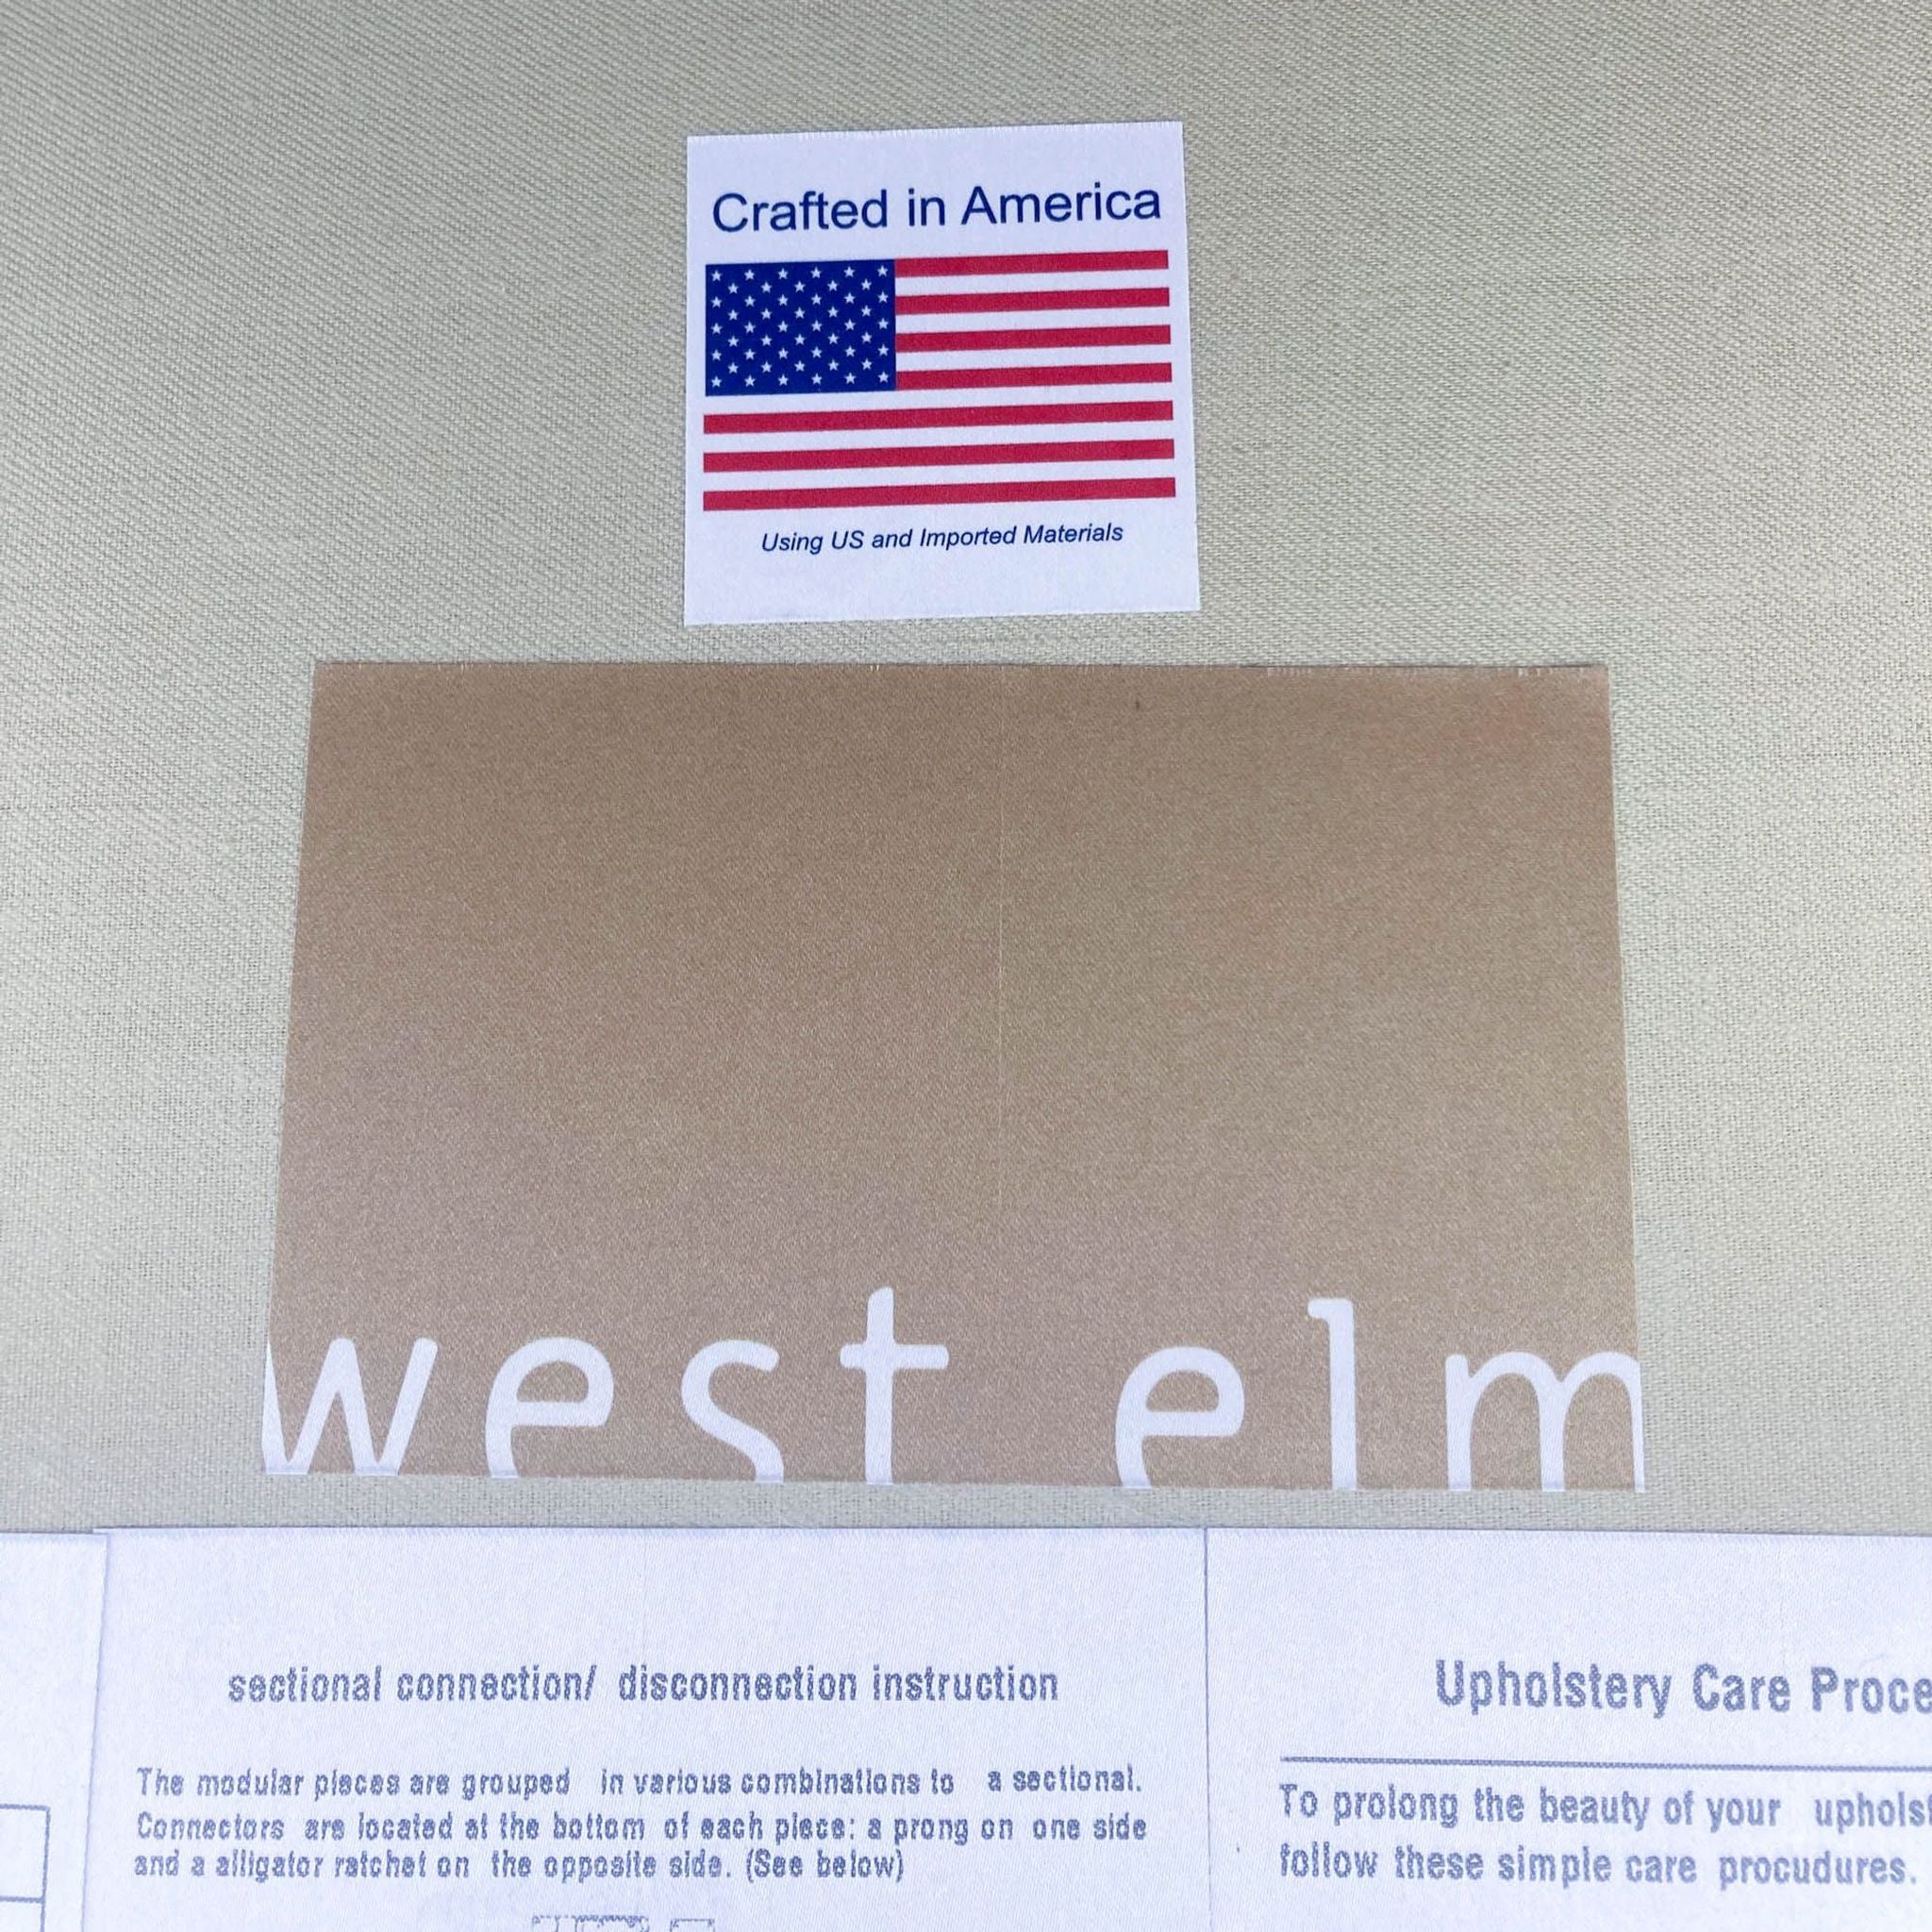 Crafted in America label on West Elm branded material, indicating US and imported materials.